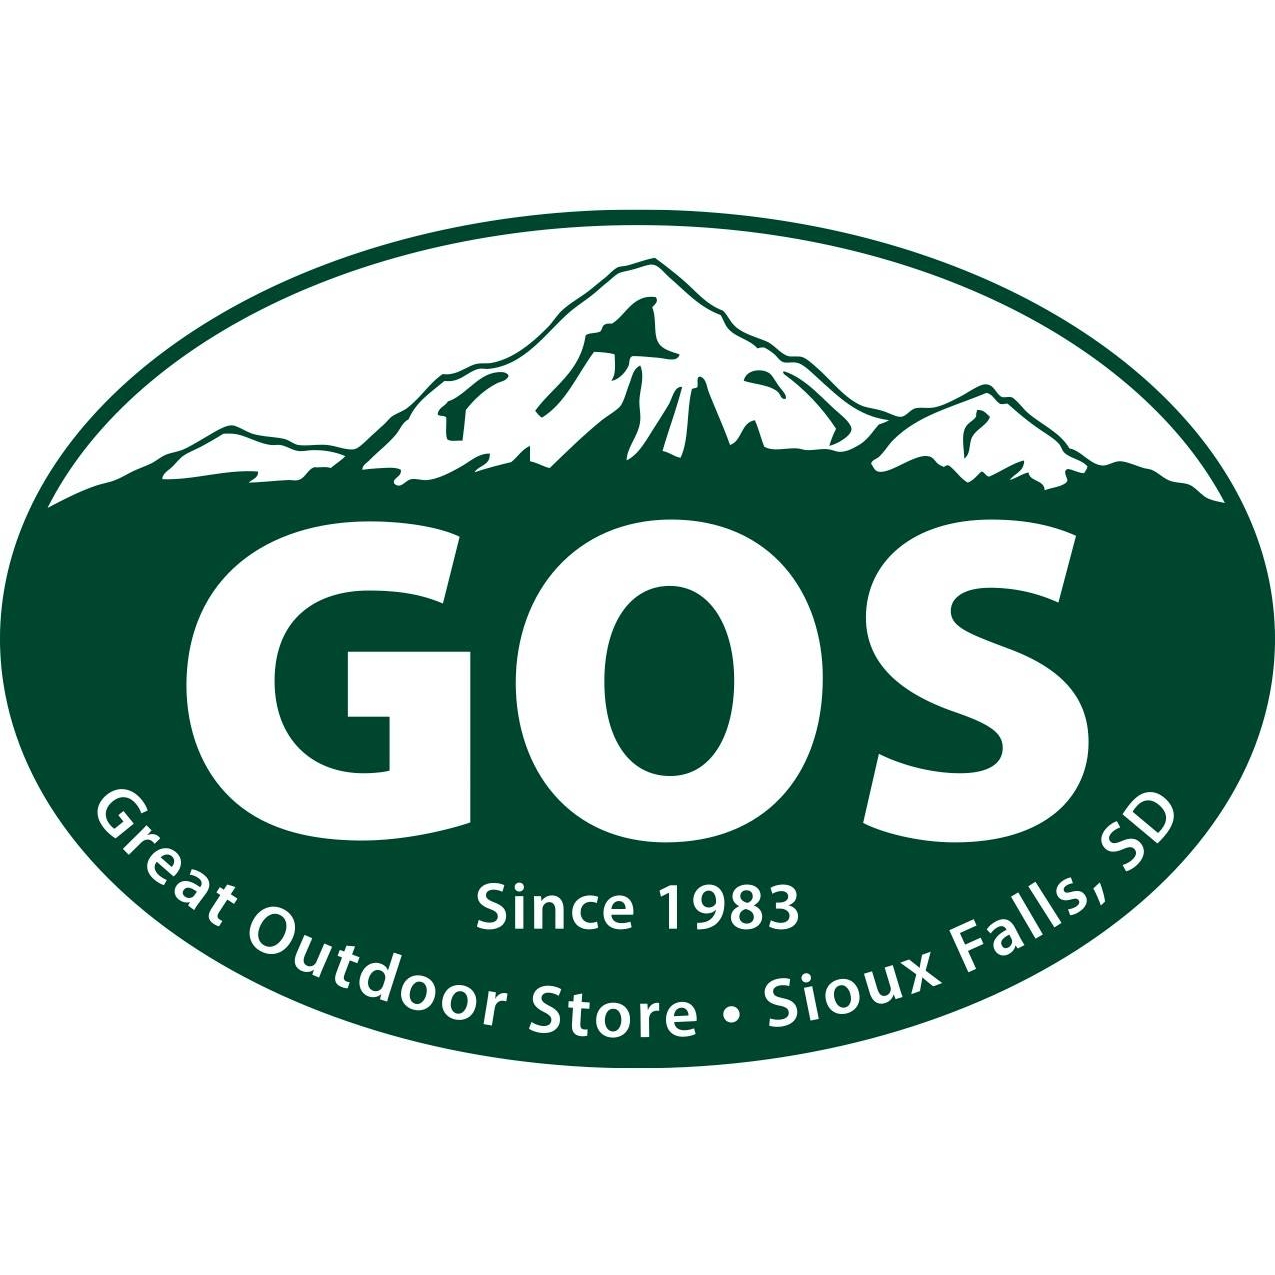 Company logo of Great Outdoor Store